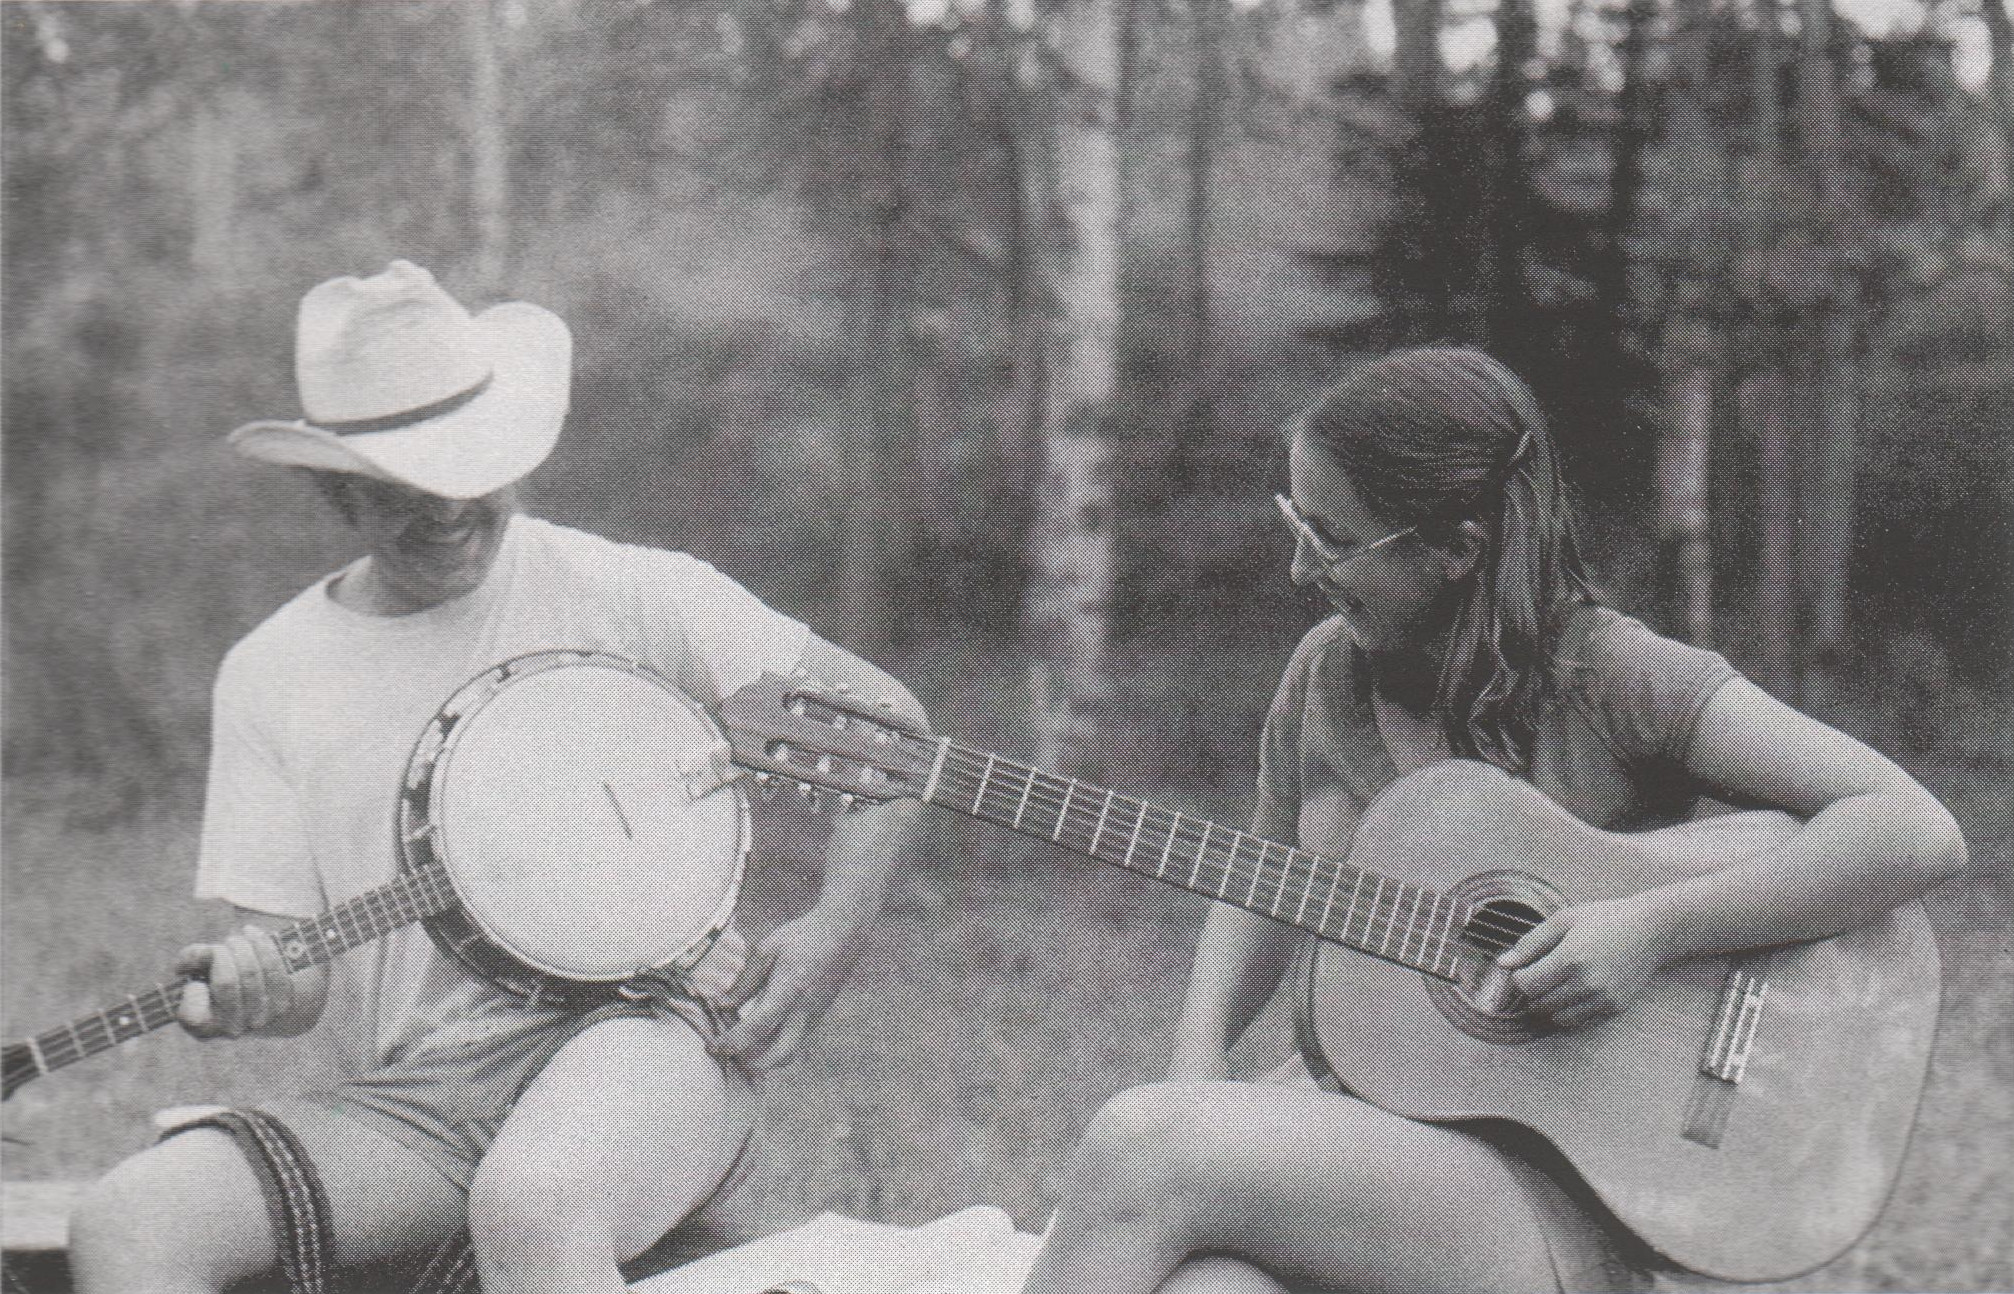 At the Waiparous Creek campout in 1980, David McGraw and Elizabeth Asher worked on a song